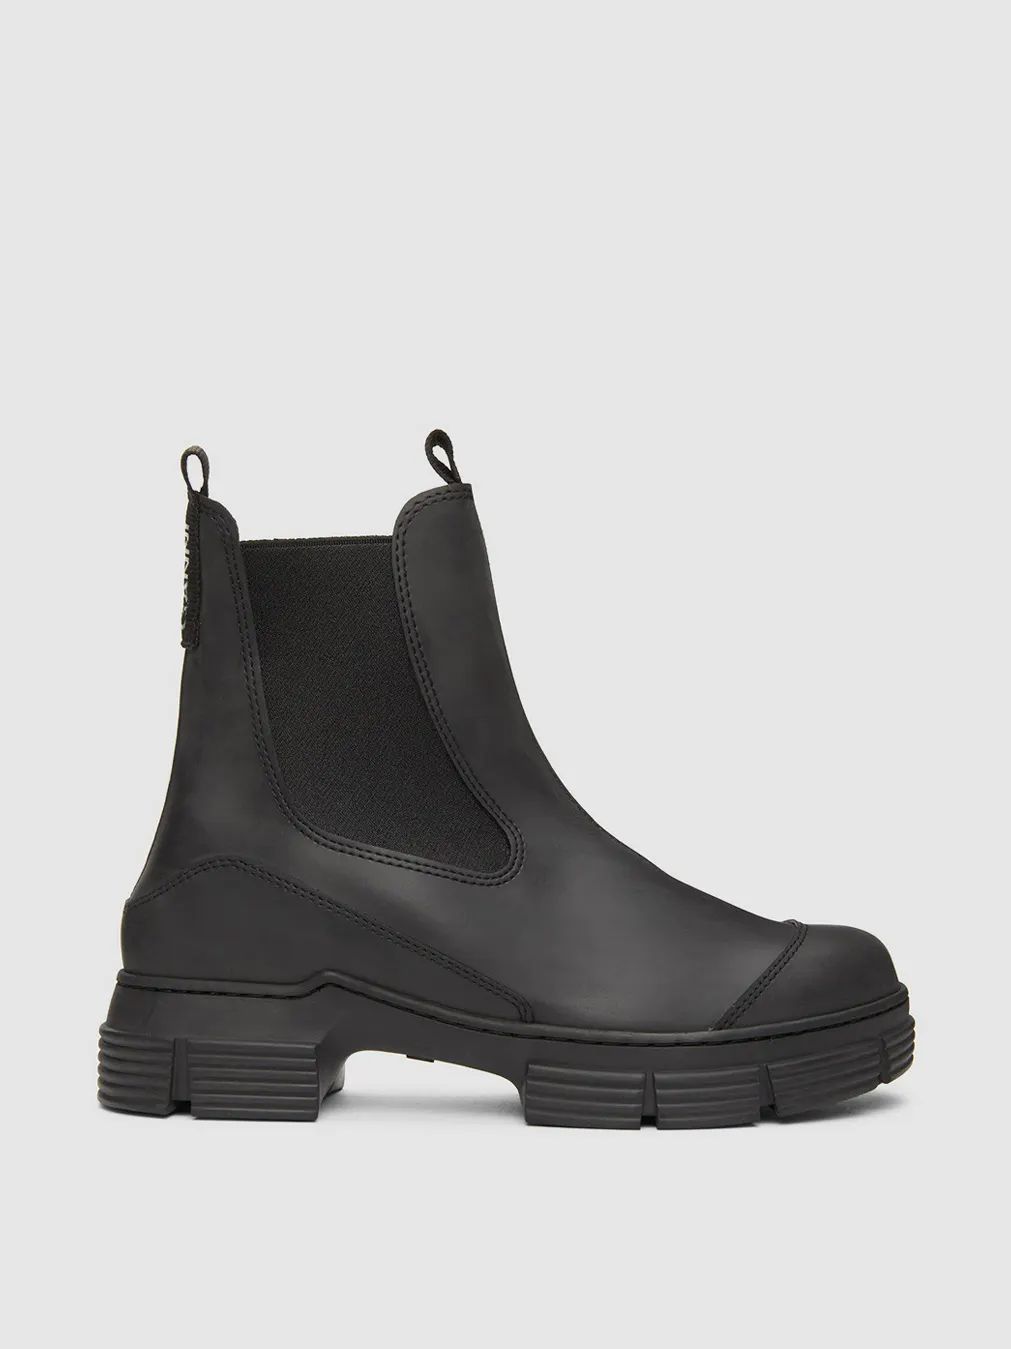 Recycled Rubber City Boot | Verishop